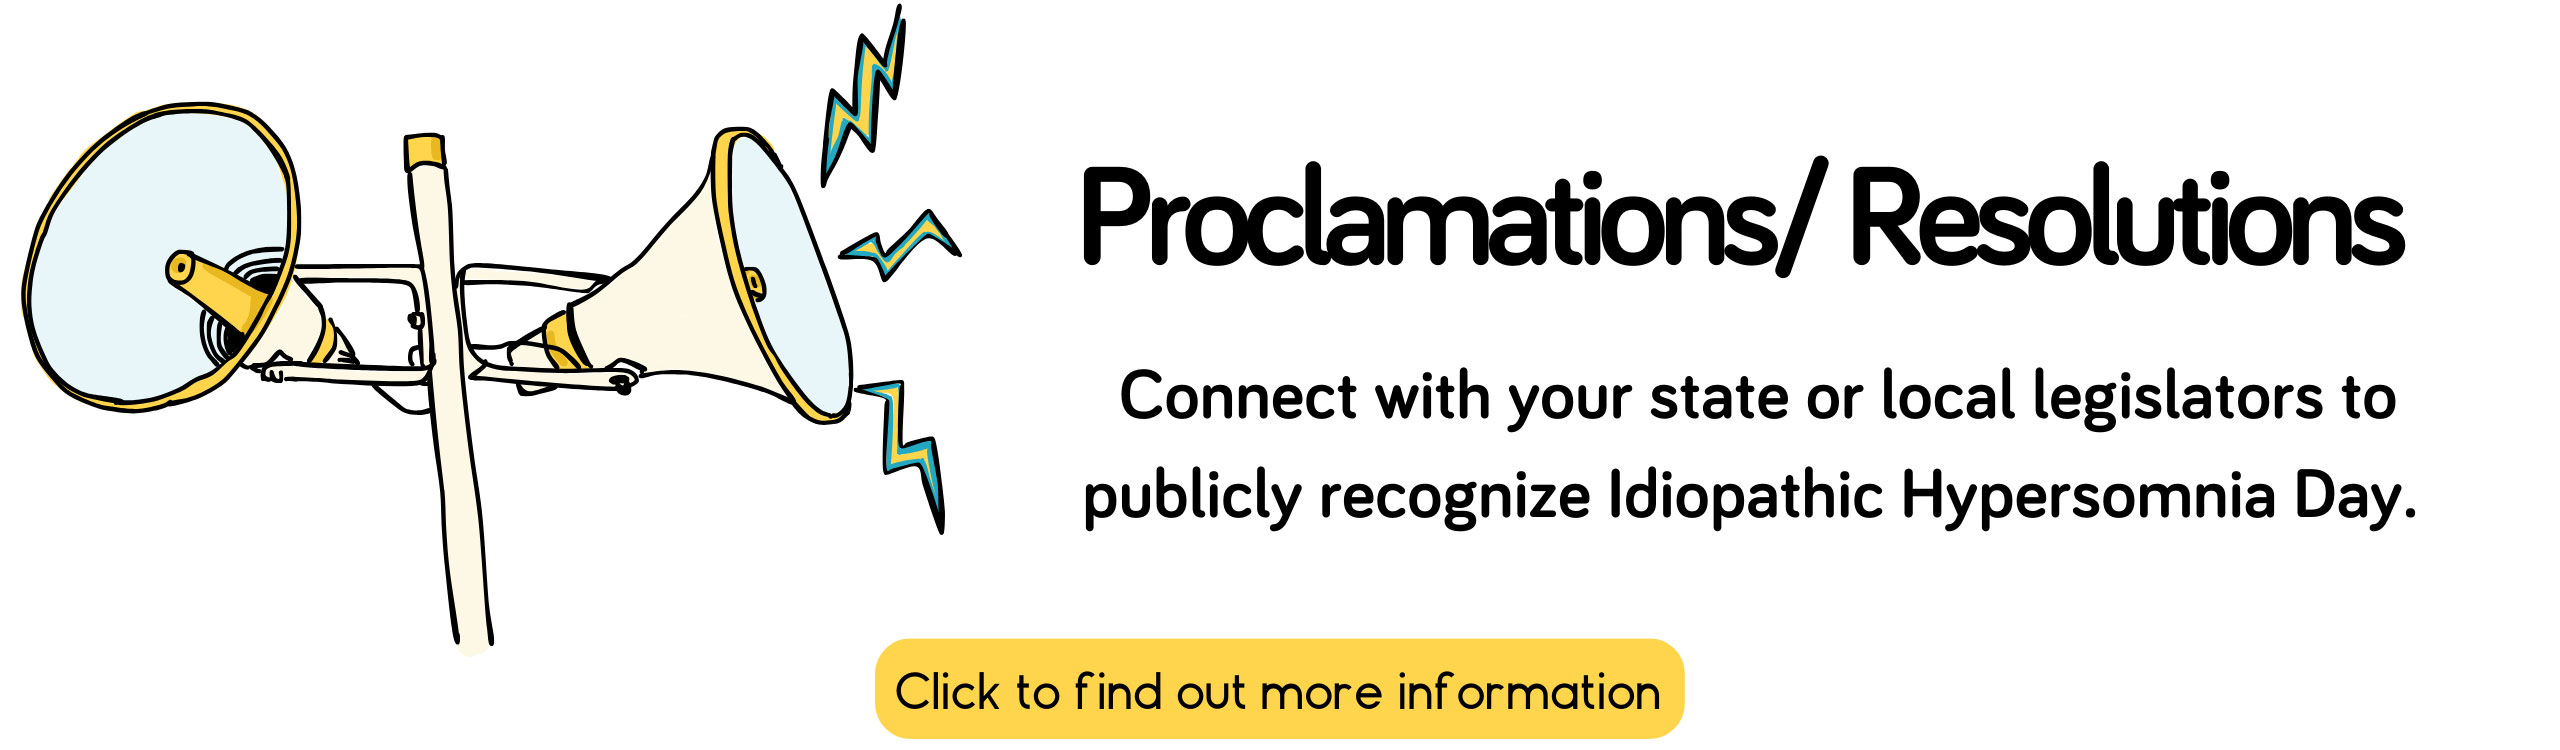 Proclamations / Resolutions - Connect with your state or local legislators to publicly recognize Idiopathic Hypersomnia Day. - Click to find our more information.